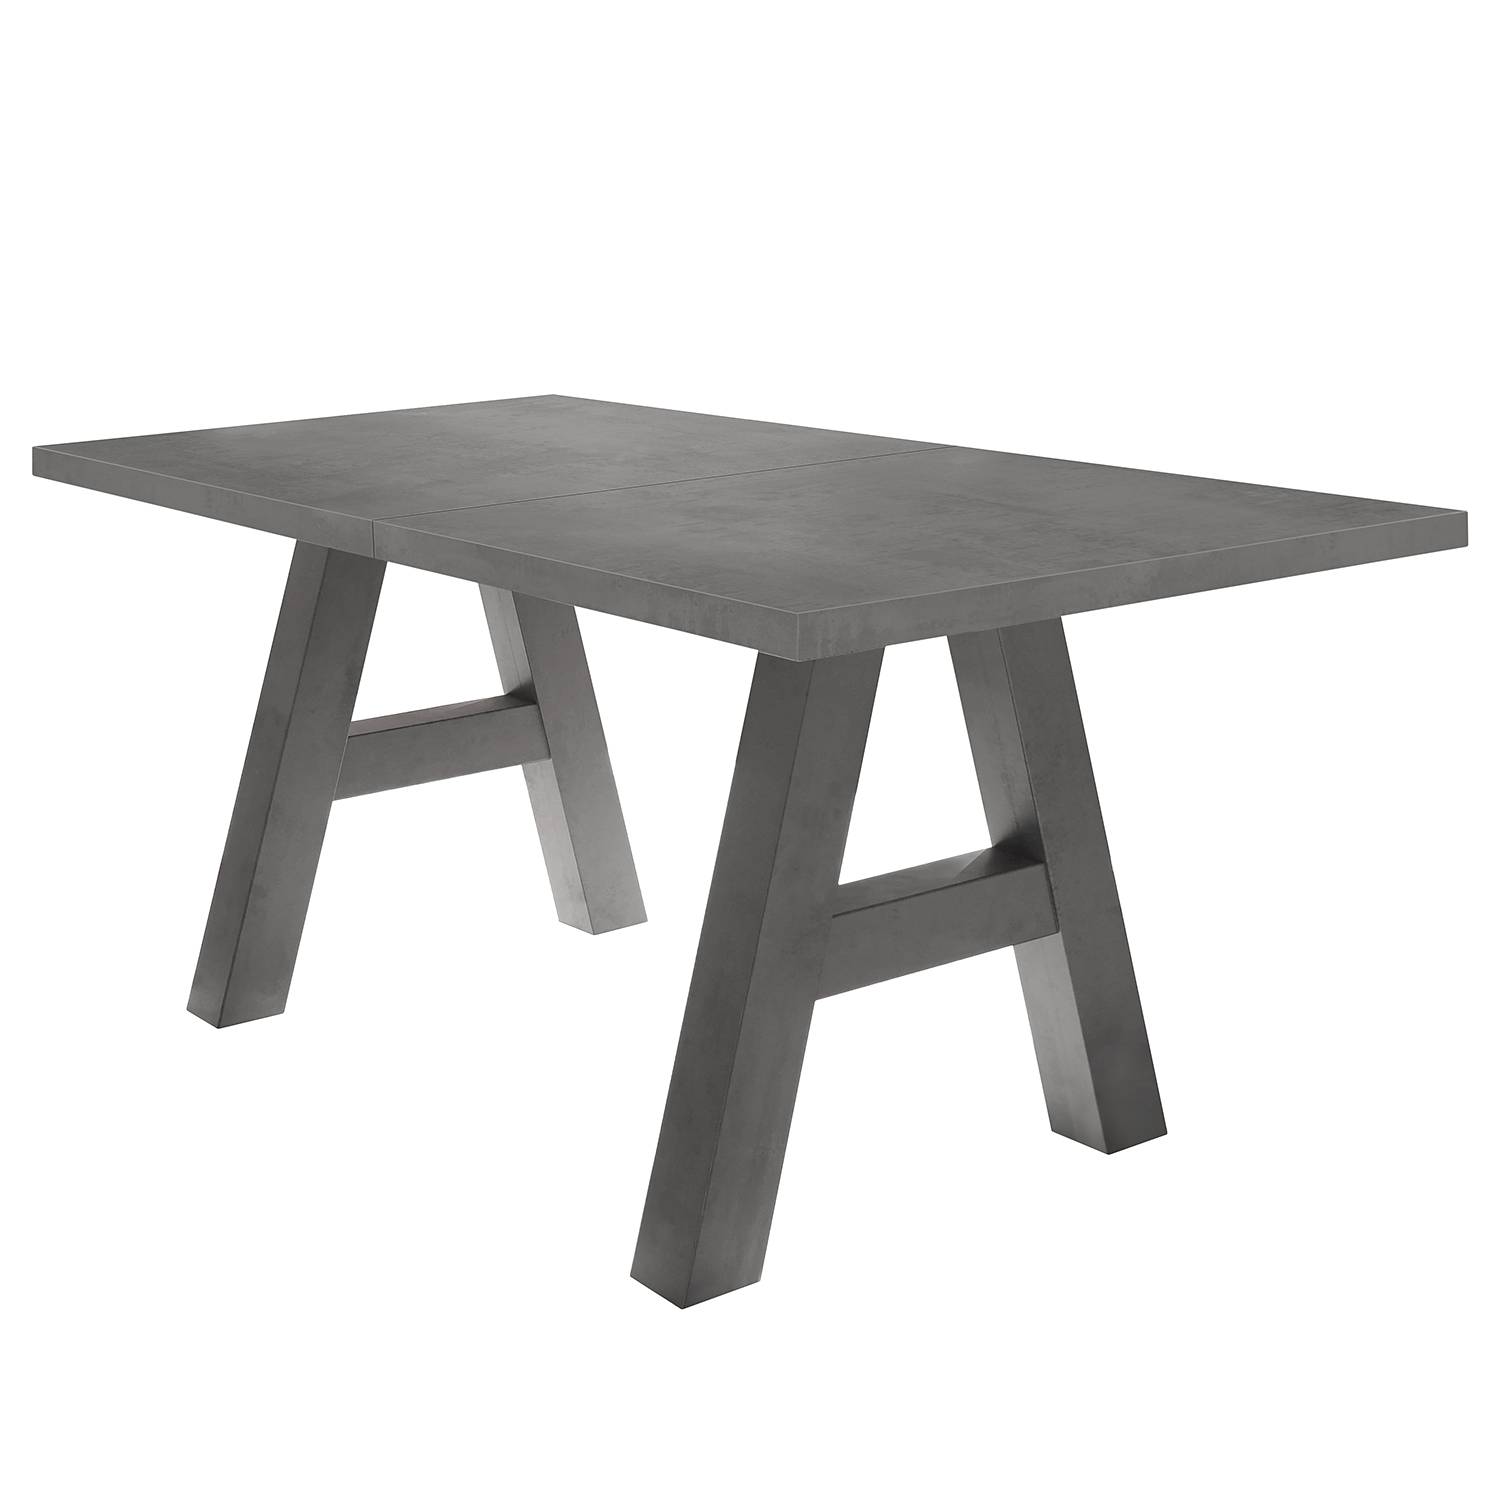 Image of Table extensible Leeton l 000000001000121511